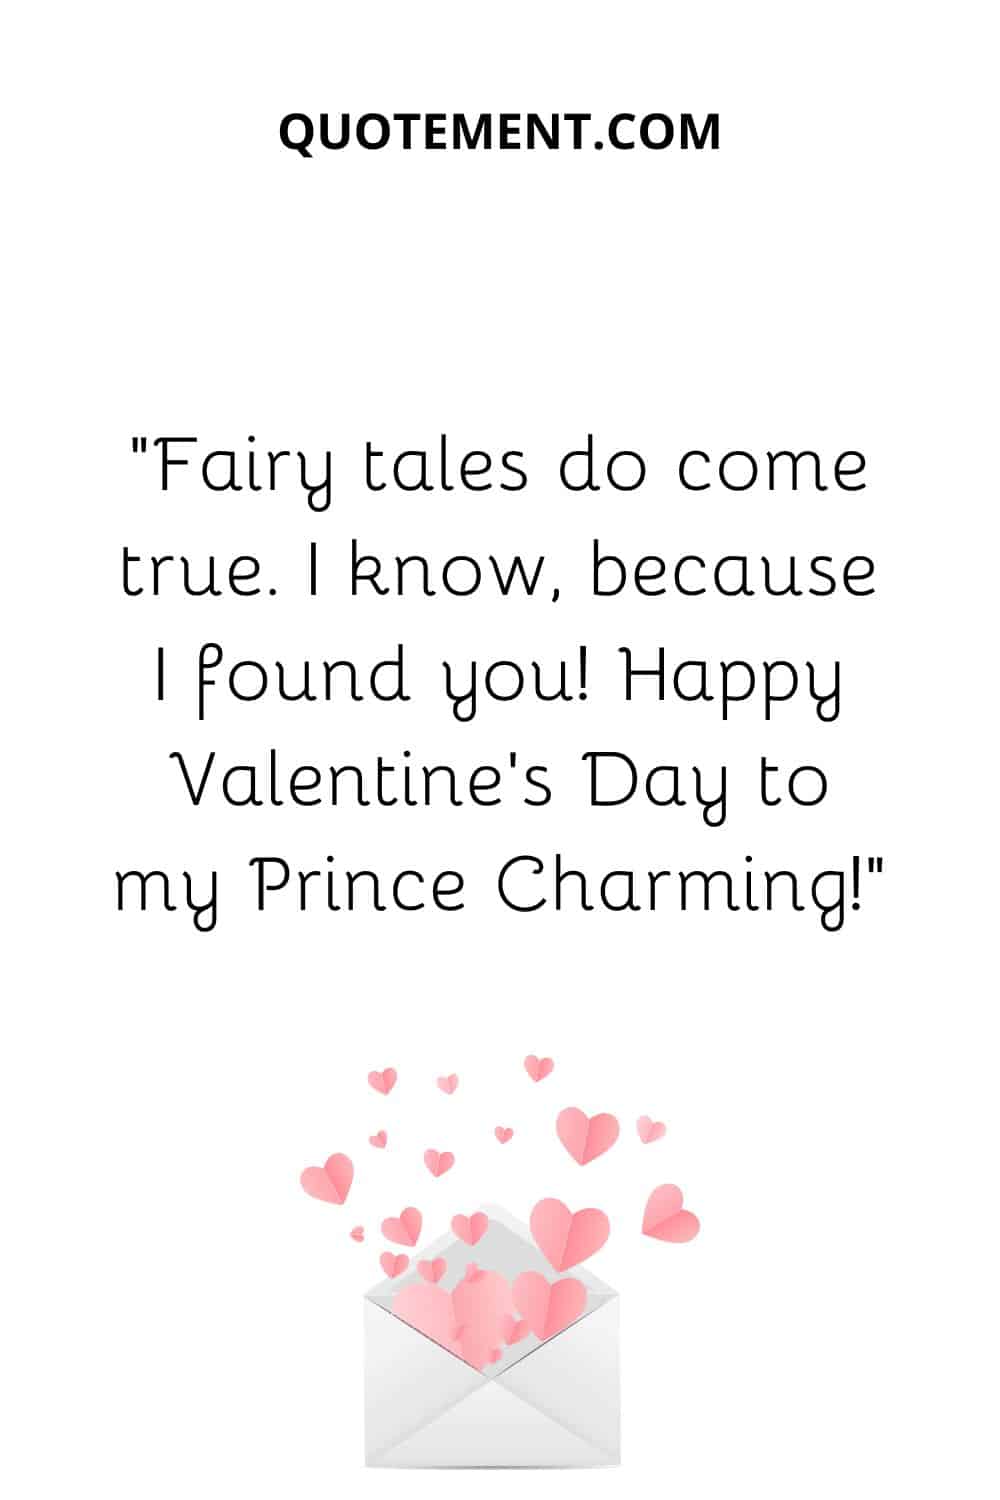 “Fairy tales do come true. I know, because I found you! Happy Valentine’s Day to my Prince Charming!”